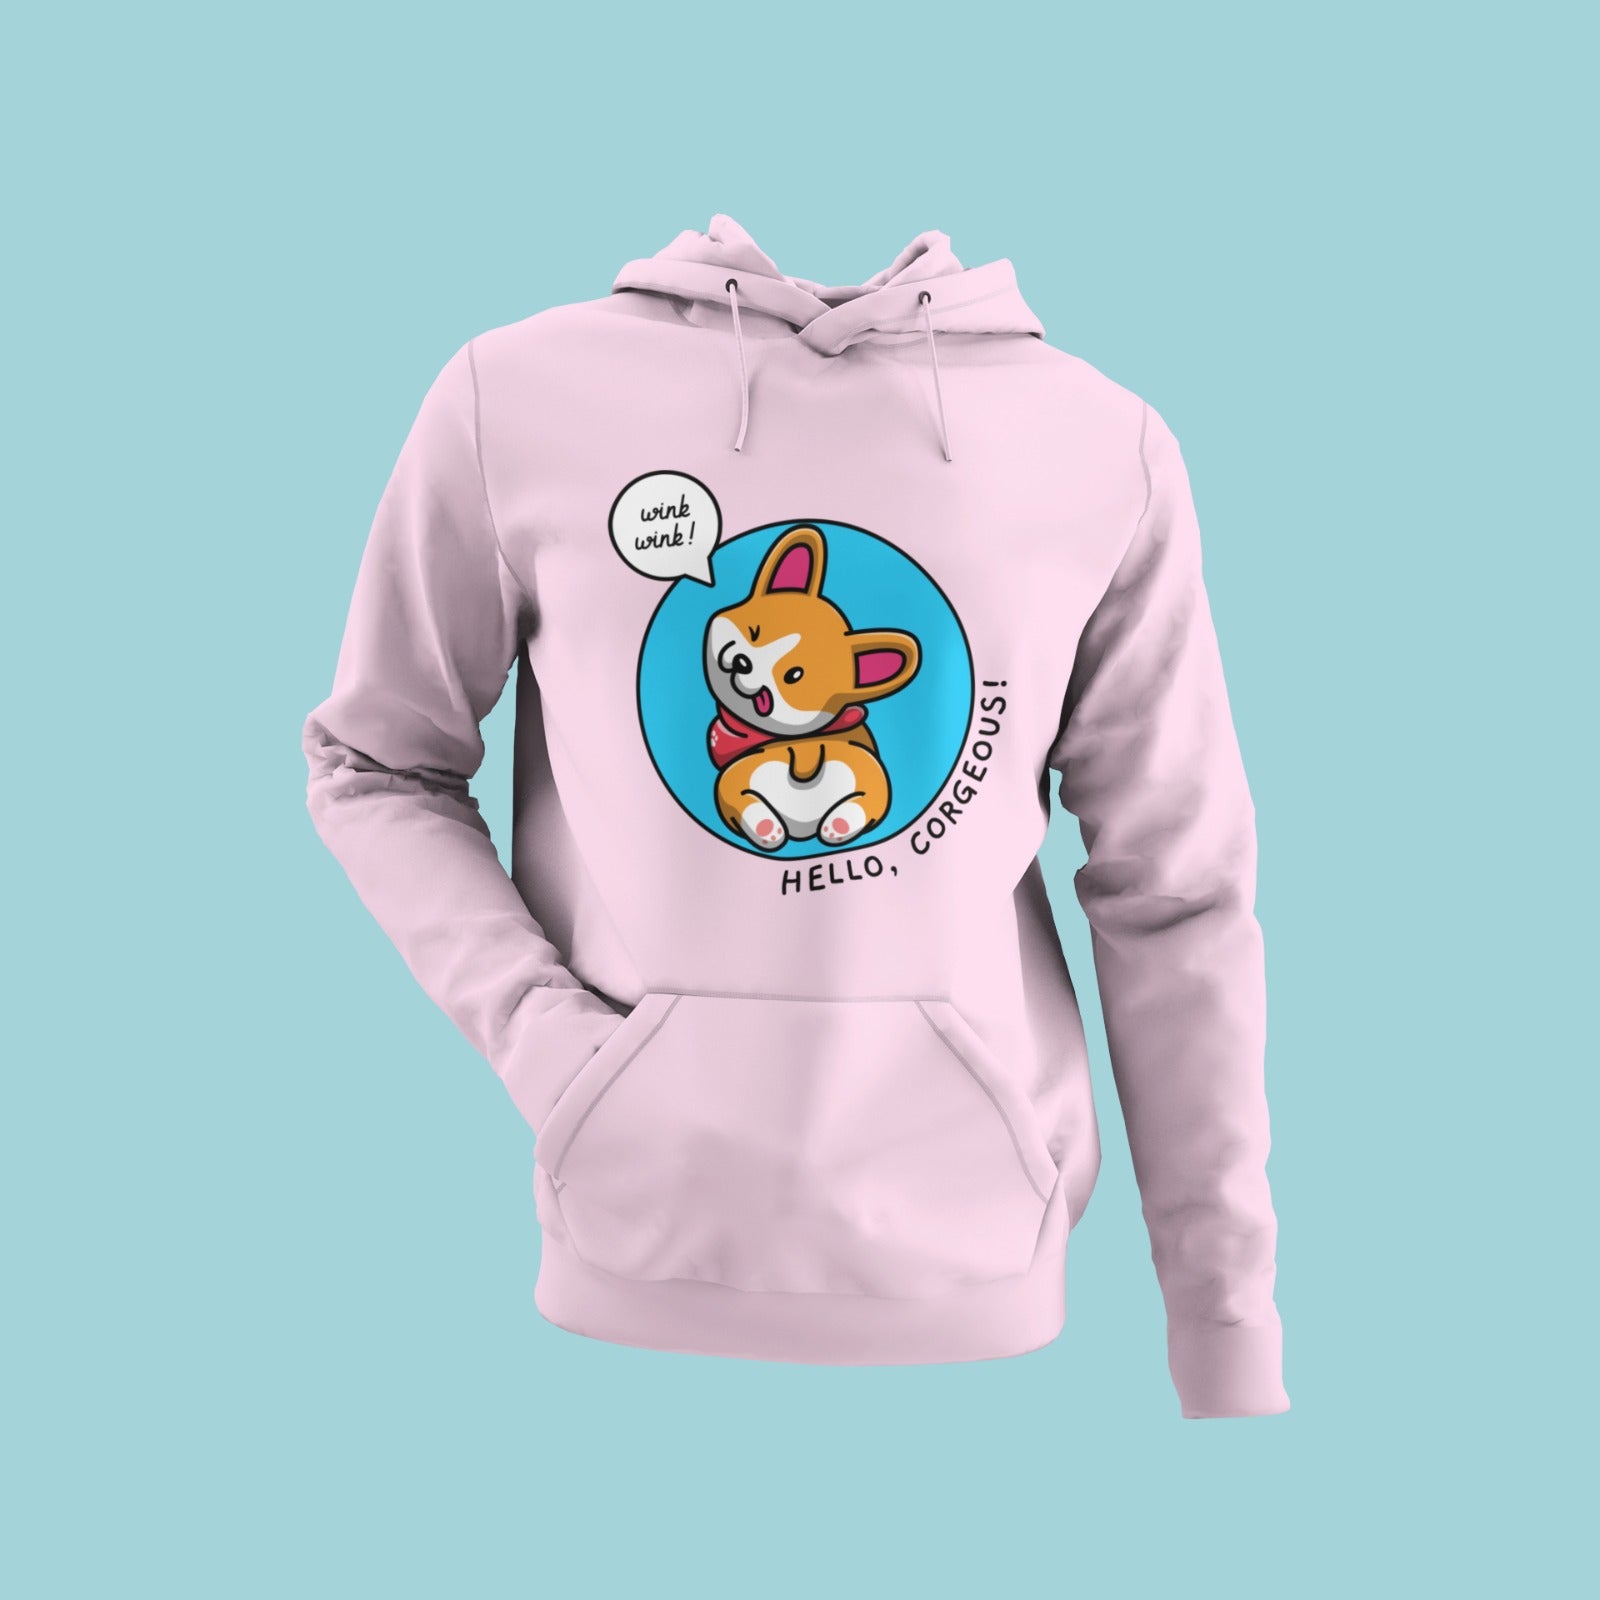 Get ready to look 'corgeous' with this baby pink hoodie featuring a cute cartoon corgi winking and a playful speech bubble saying 'wink wink!'. The message 'Hello, Corgeous!' is perfect to show your love for corgis. Stay cozy and stylish in this hoodie.